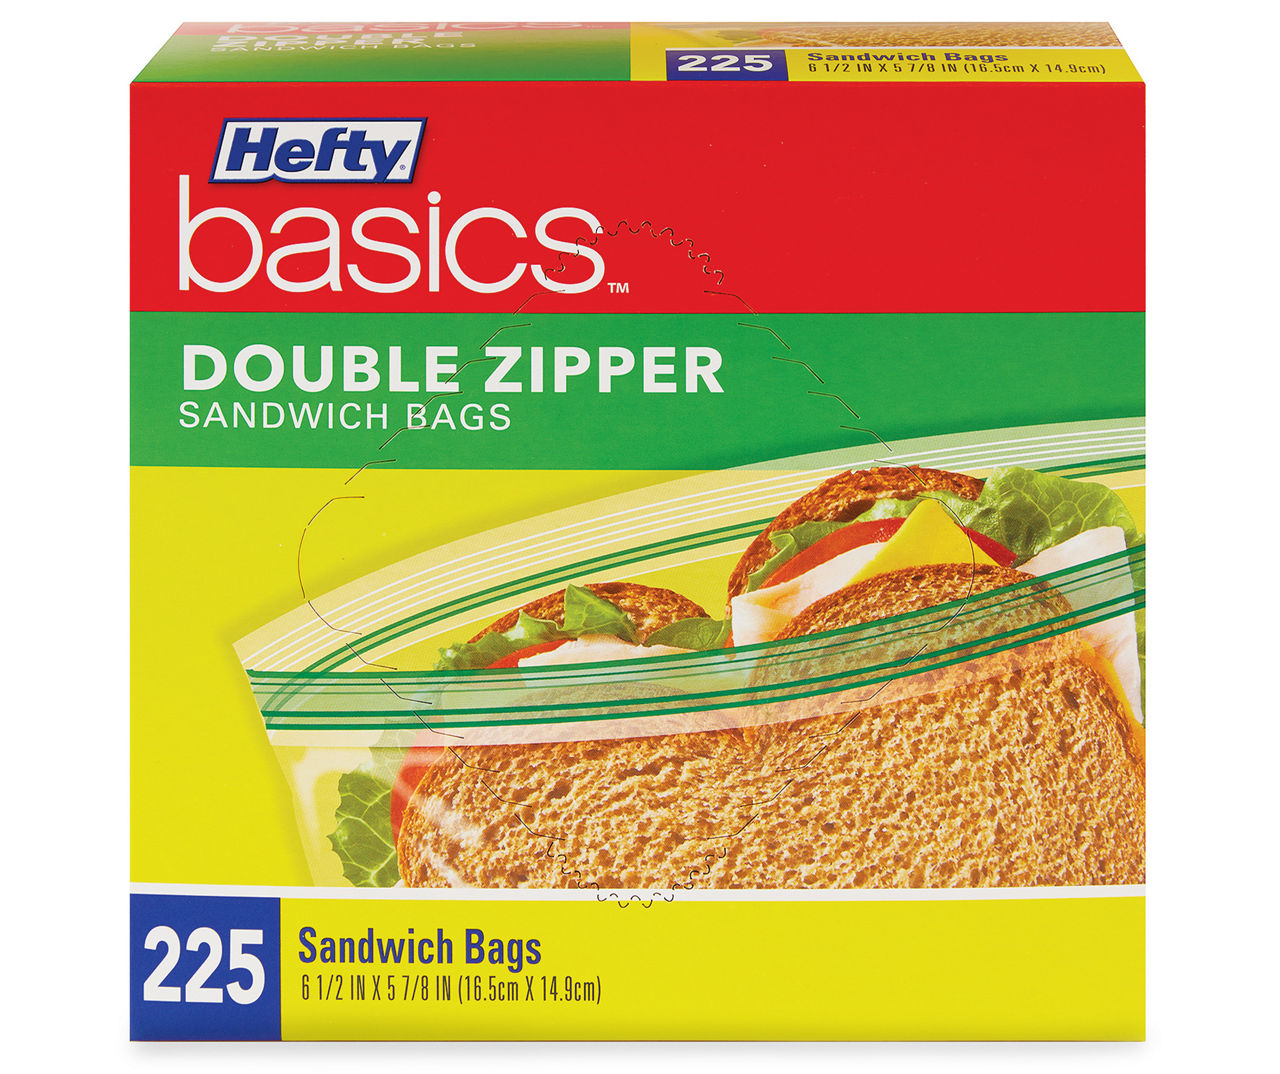 Glad Sandwich Zipper Bags Lot of 4 - 115 Count /460 Total Count